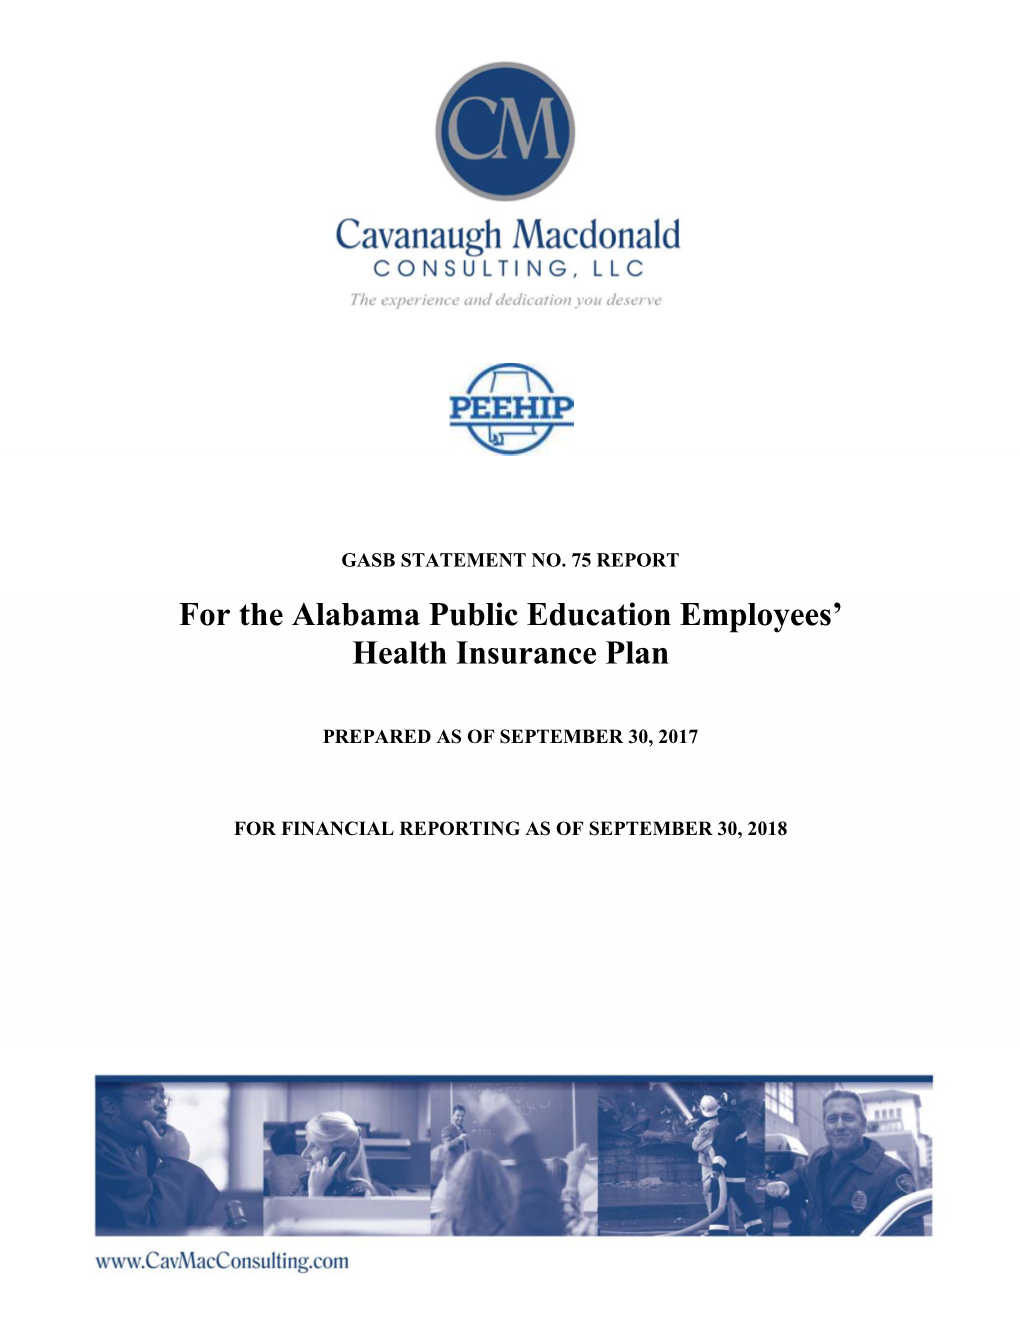 For the Alabama Public Education Employees' Health Insurance Plan